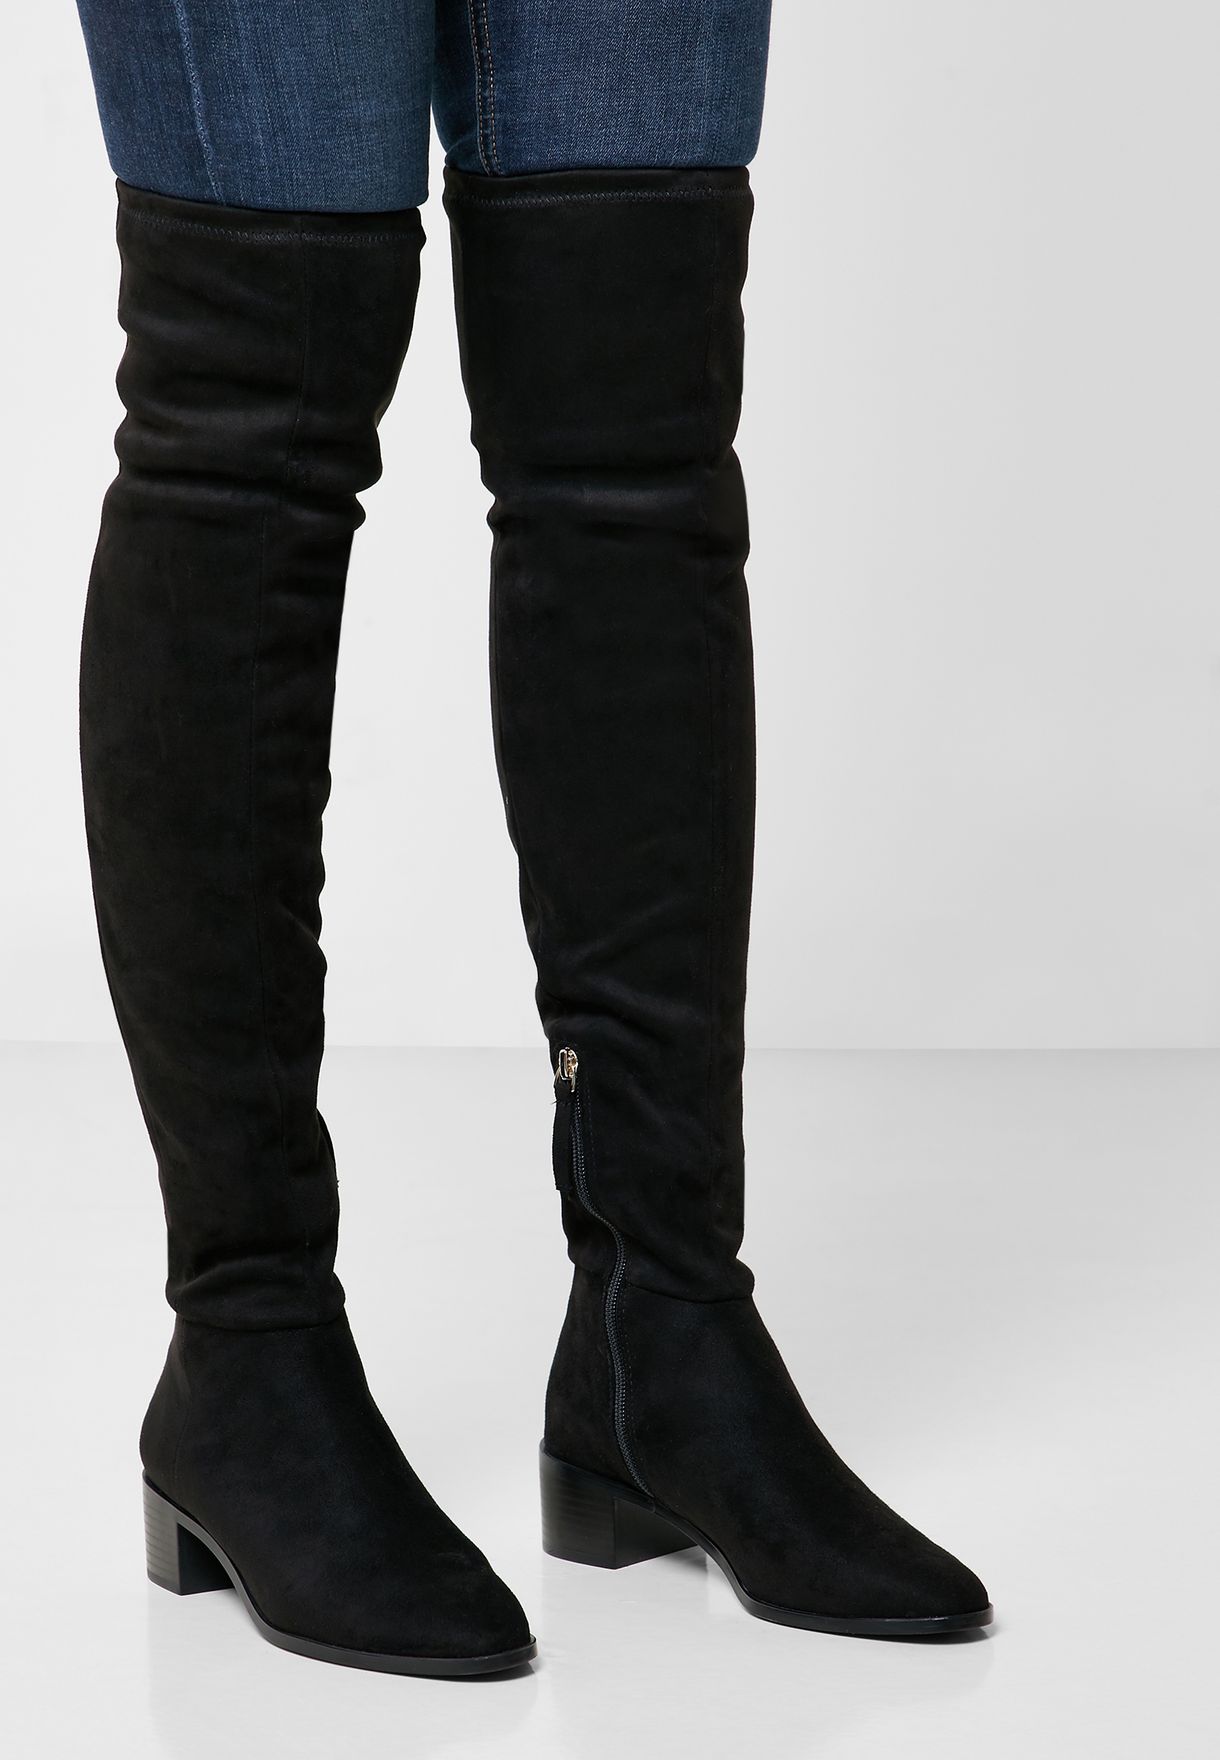 mango flat over the knee boots